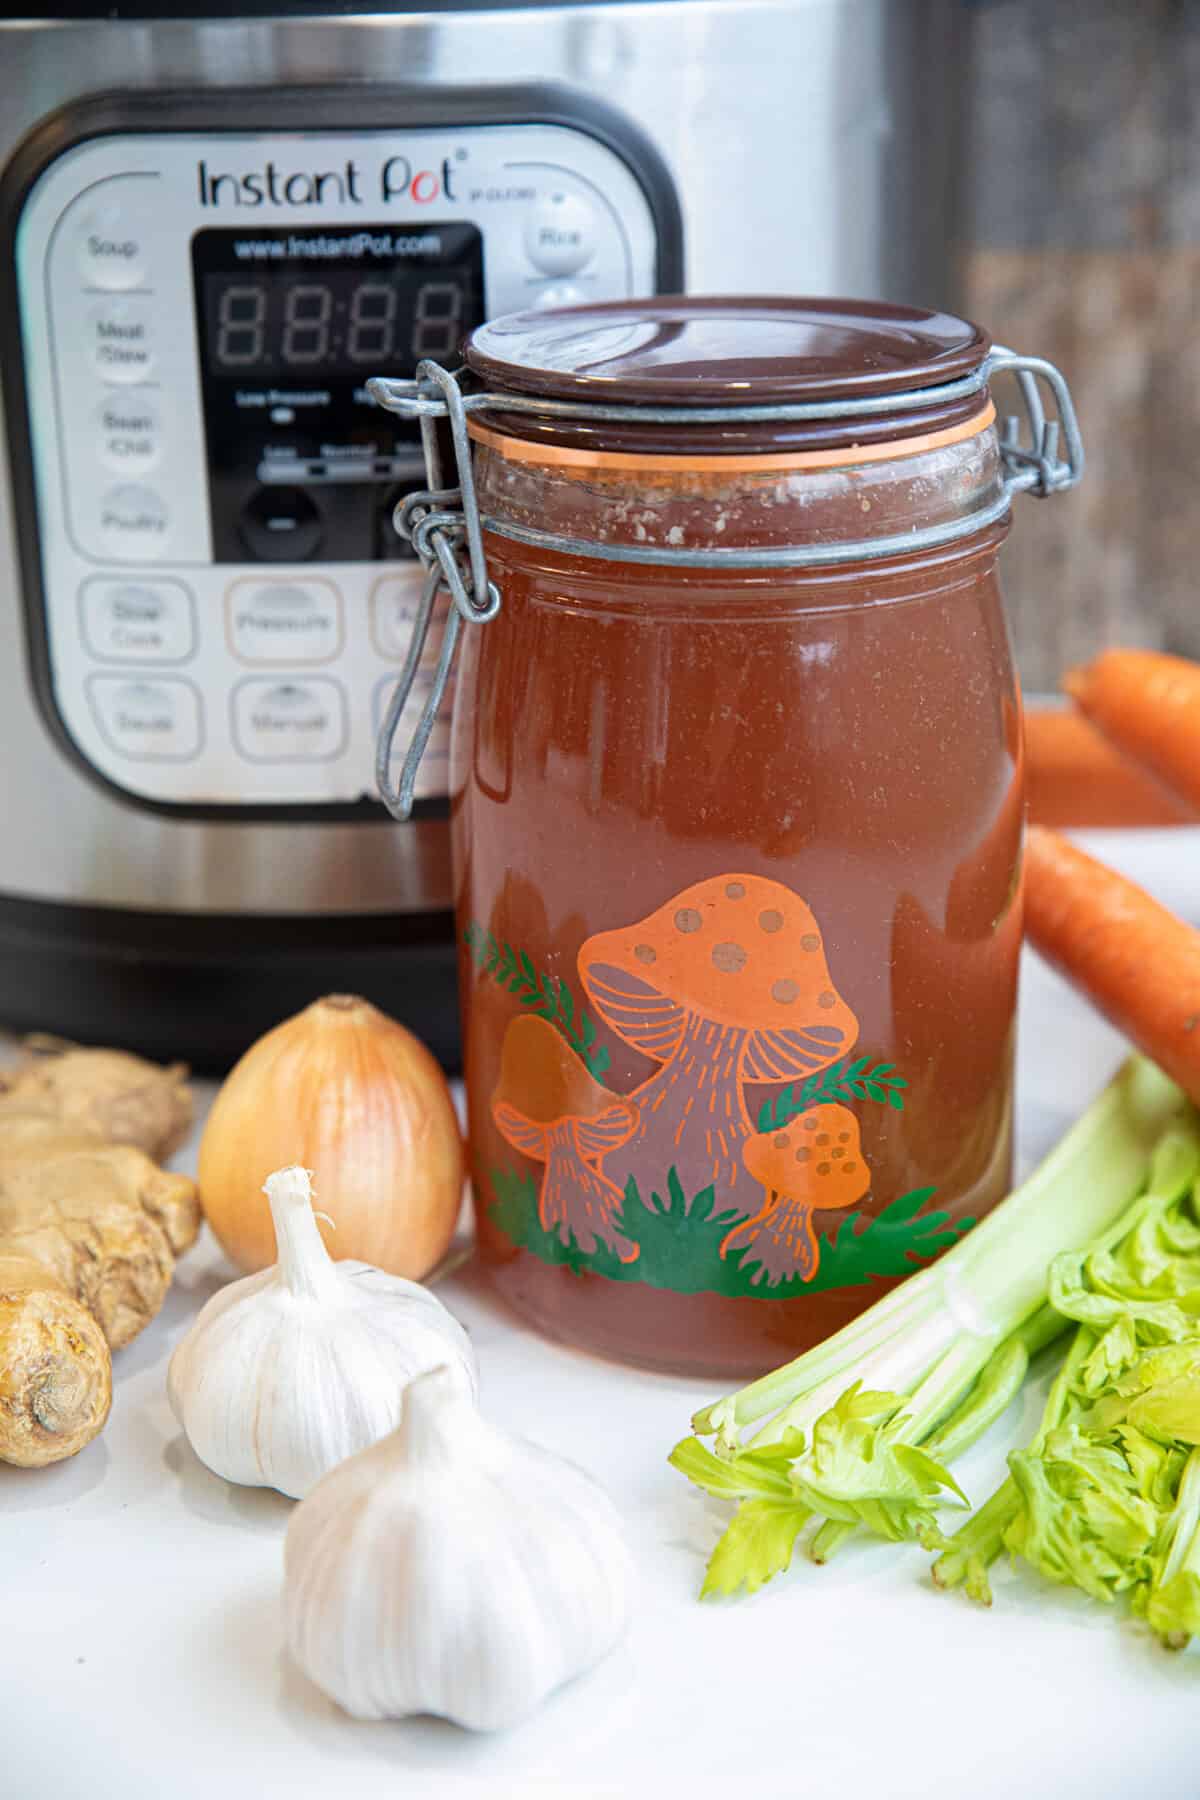 pork broth in a jar and an Instant Pot 